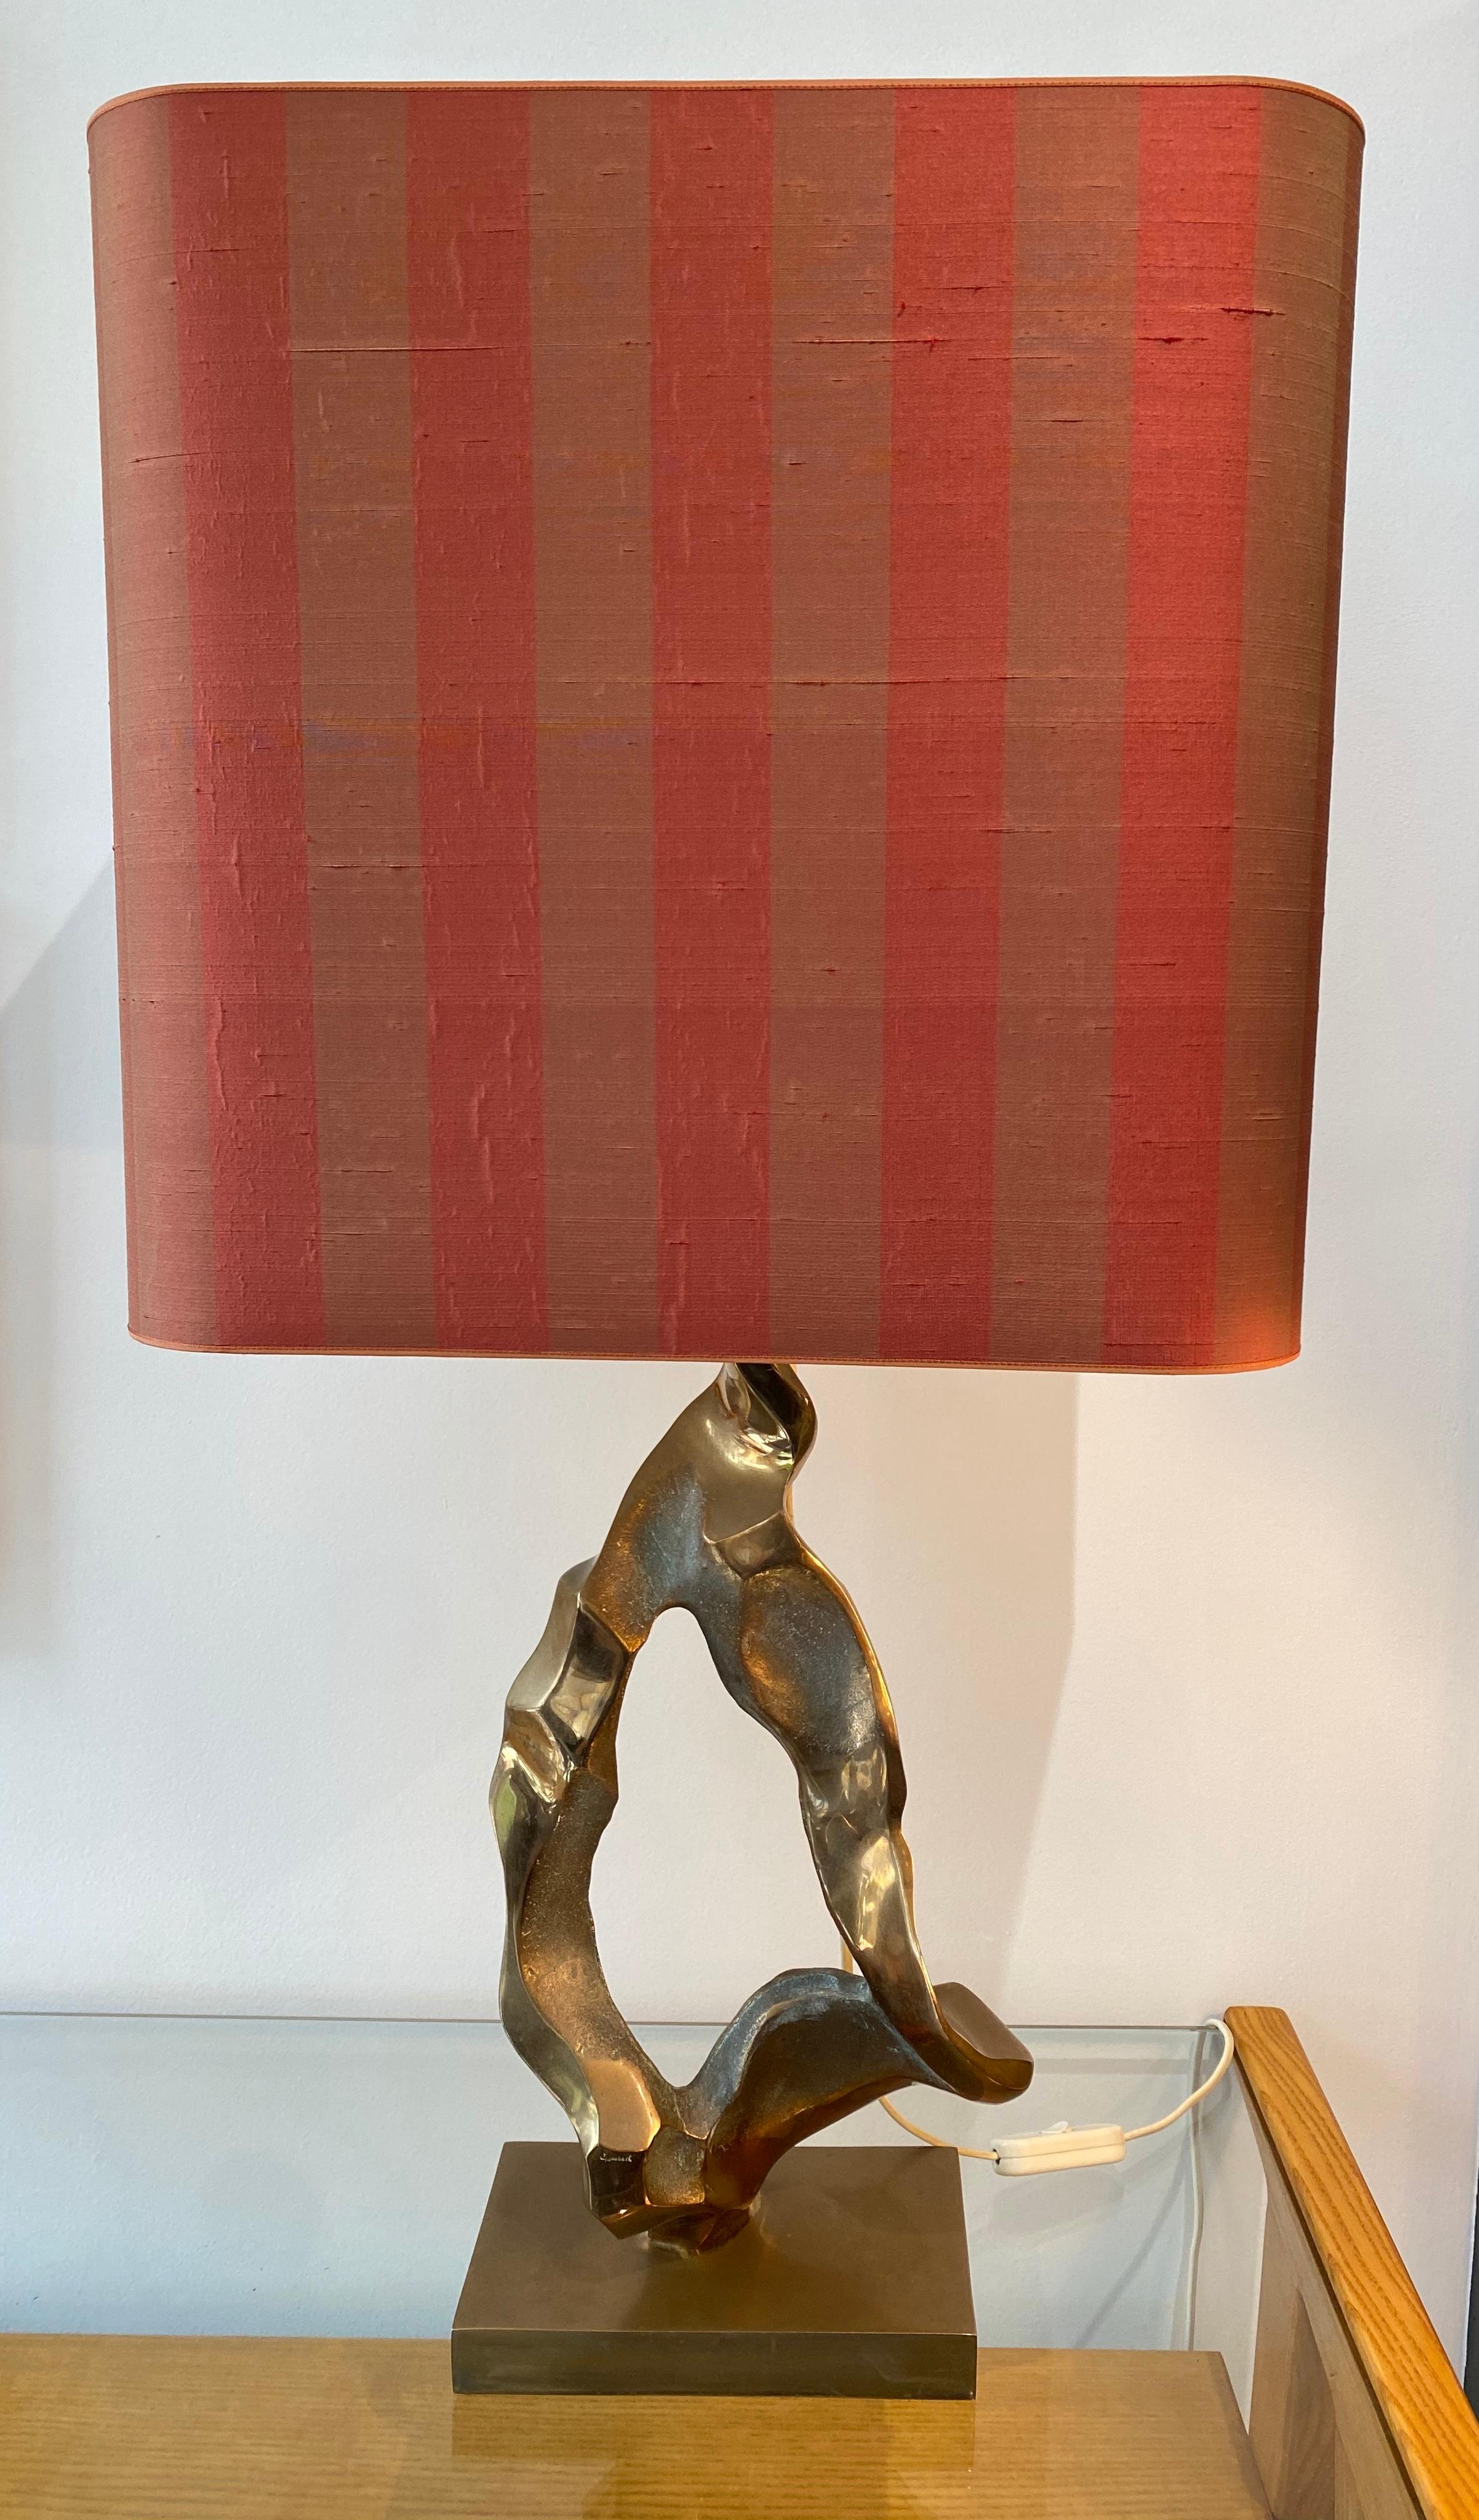 An abstract bronze sculptural table lamp by the French artist and sculptor Michel Jaubert with original shade. 
Signed M.Jaubert

Total height including shade: 82cm.